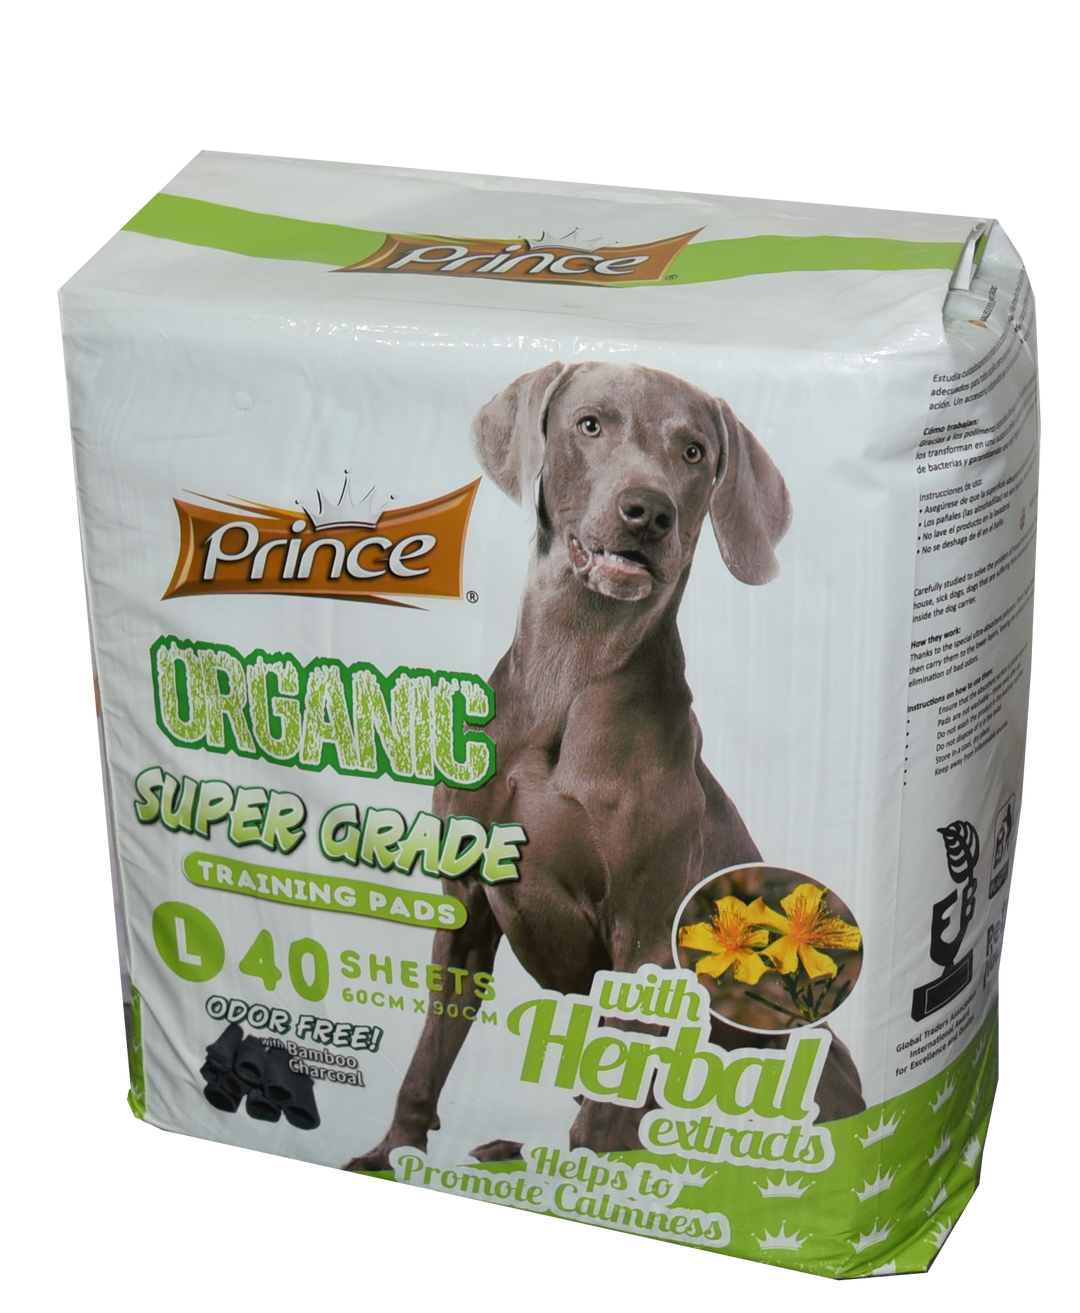 Prince Puppy Super Grade Training Pads, Organic with herbal extracts